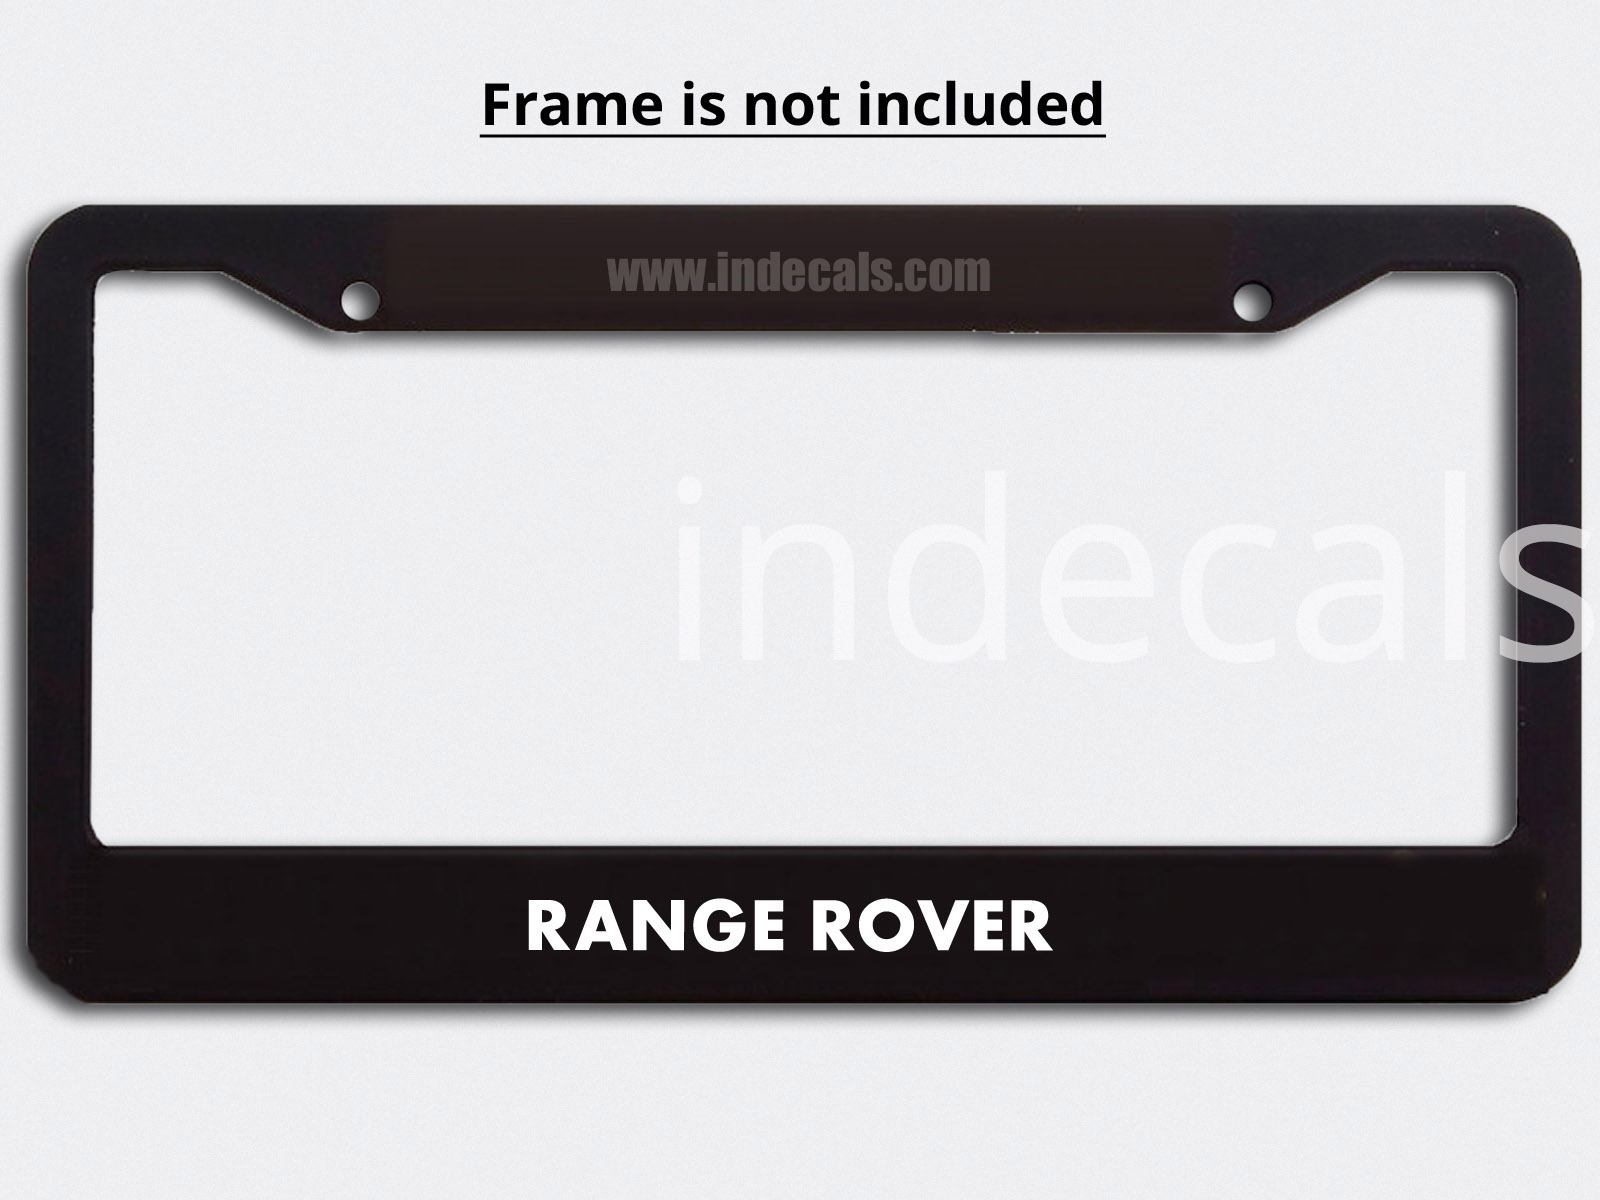 3 x Range Rover Stickers for Plate Frame - White